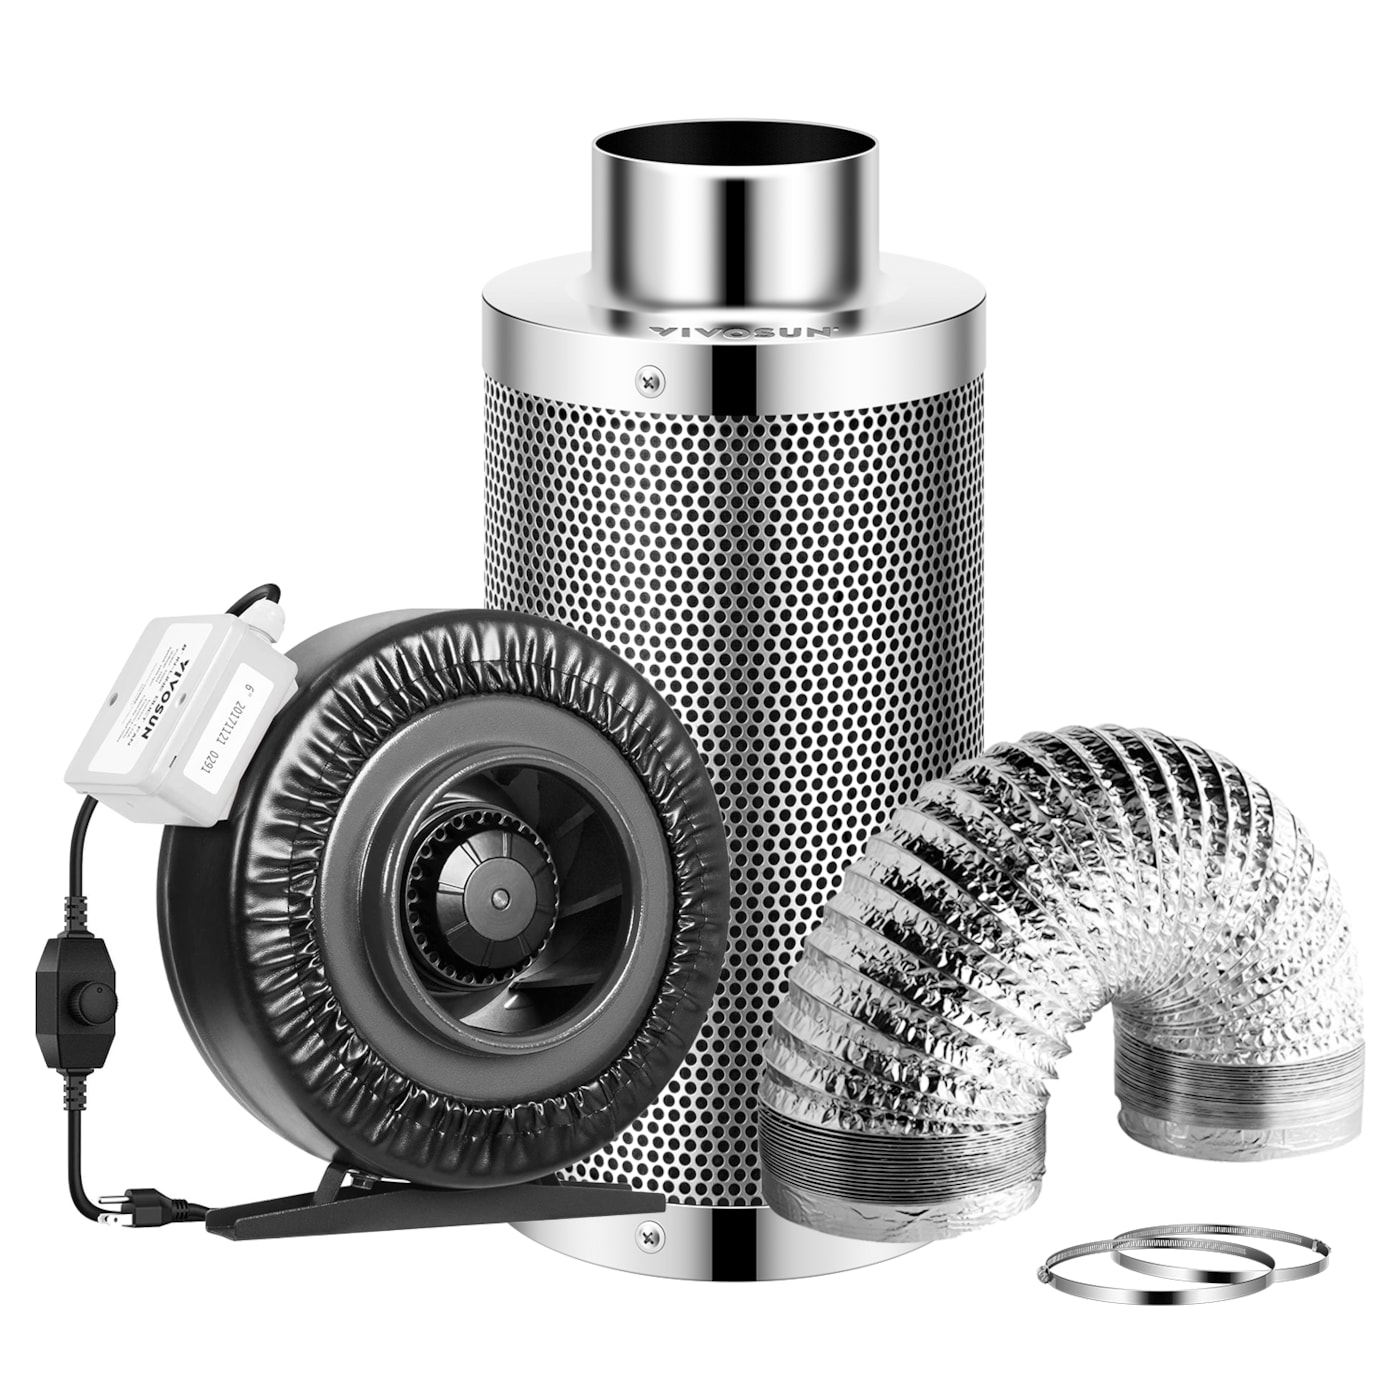 VIVOSUN 6-Inch 440 CFM Inline Duct Fan Kit with Carbon Filter and Ducting